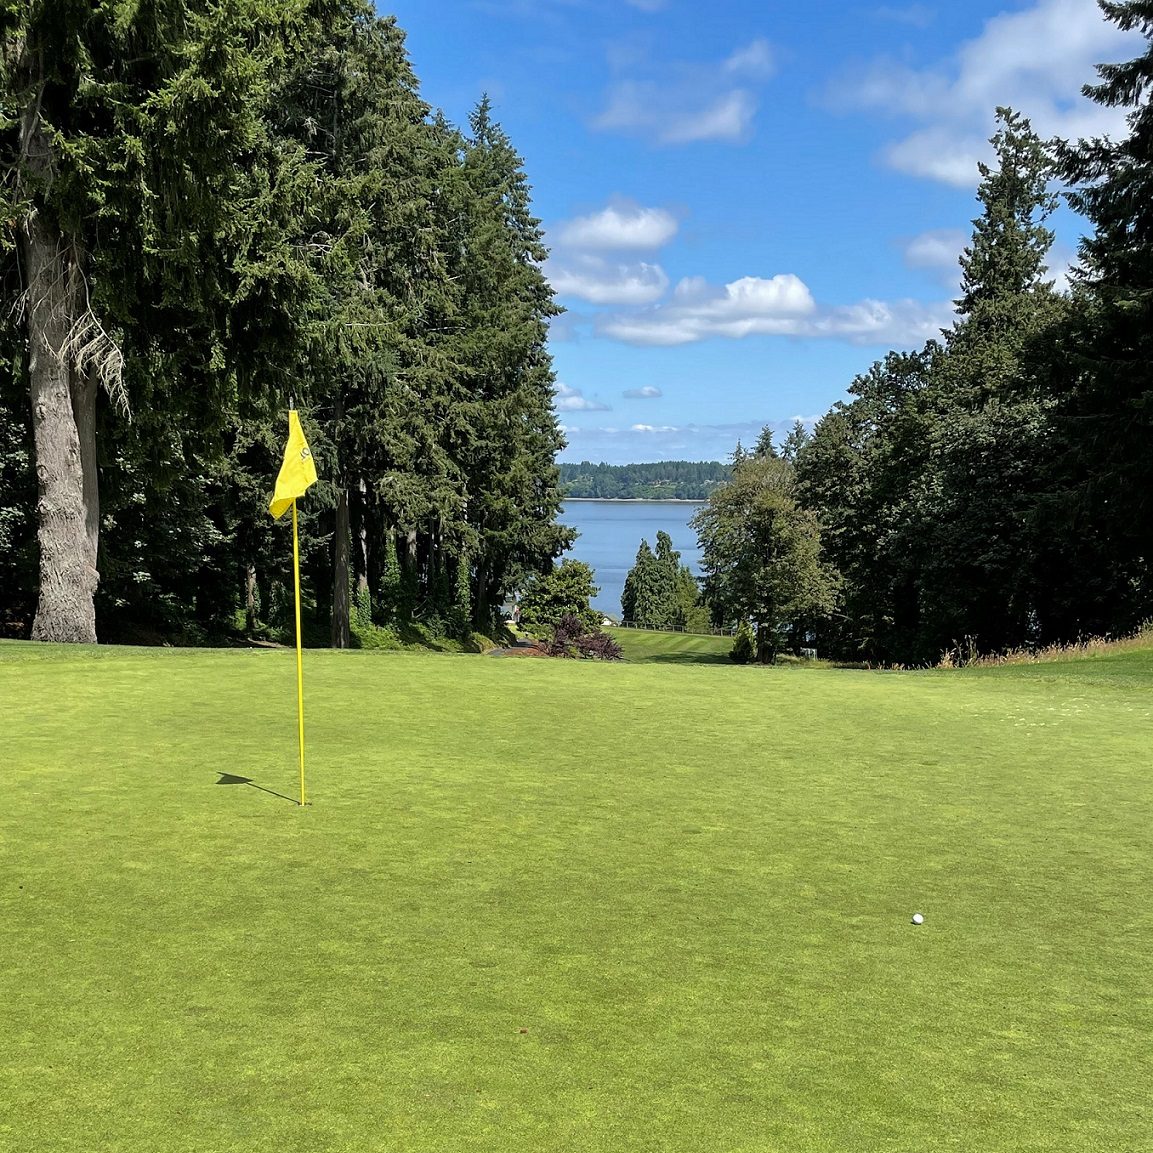 photo of a golf course green with a yellow hole flag. Evergreen trees are on either side and the Puget Sound can be seen through them in the distance